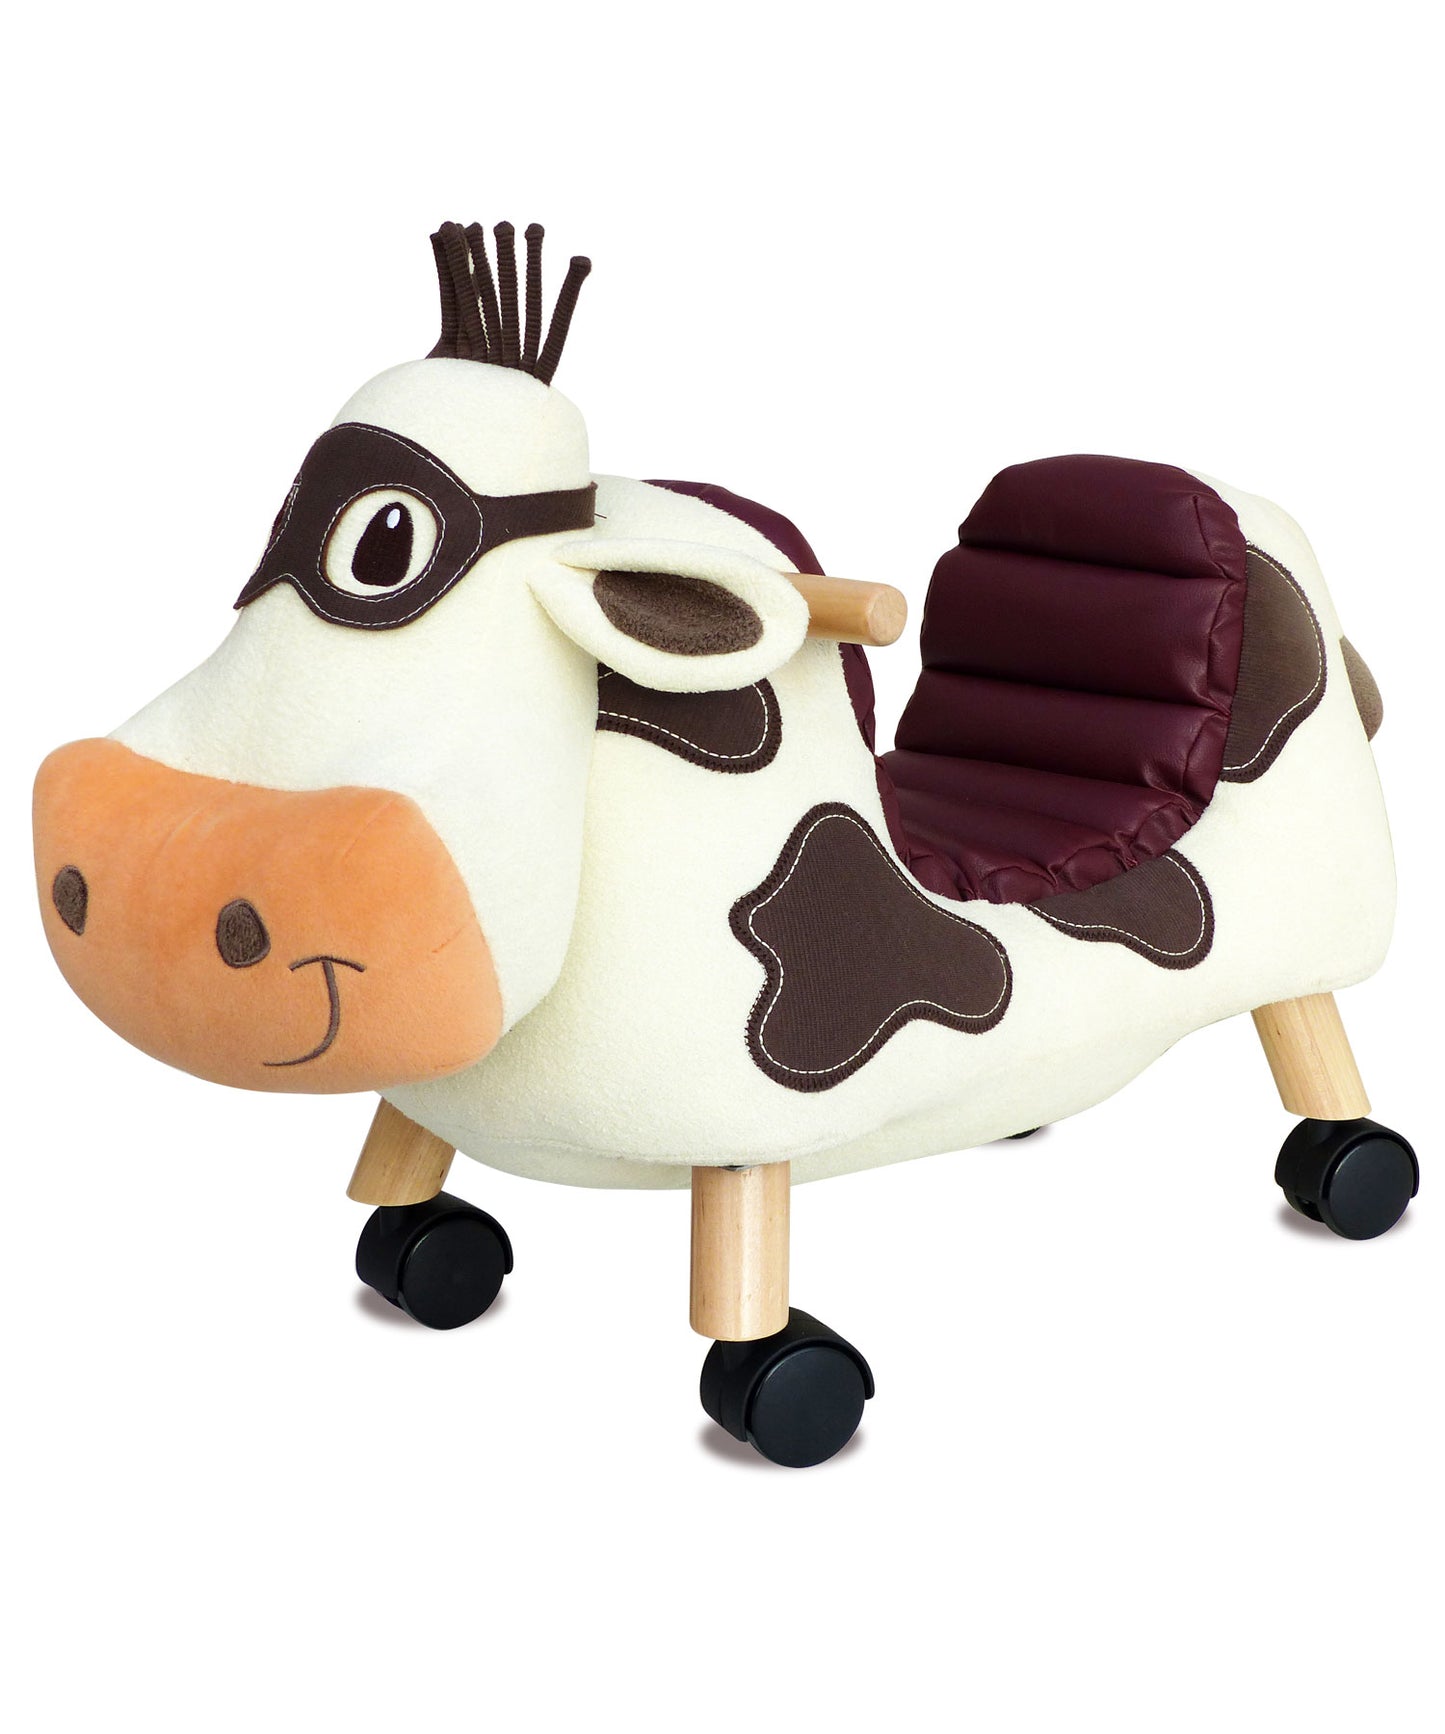 Moobert Cow Ride on Toy